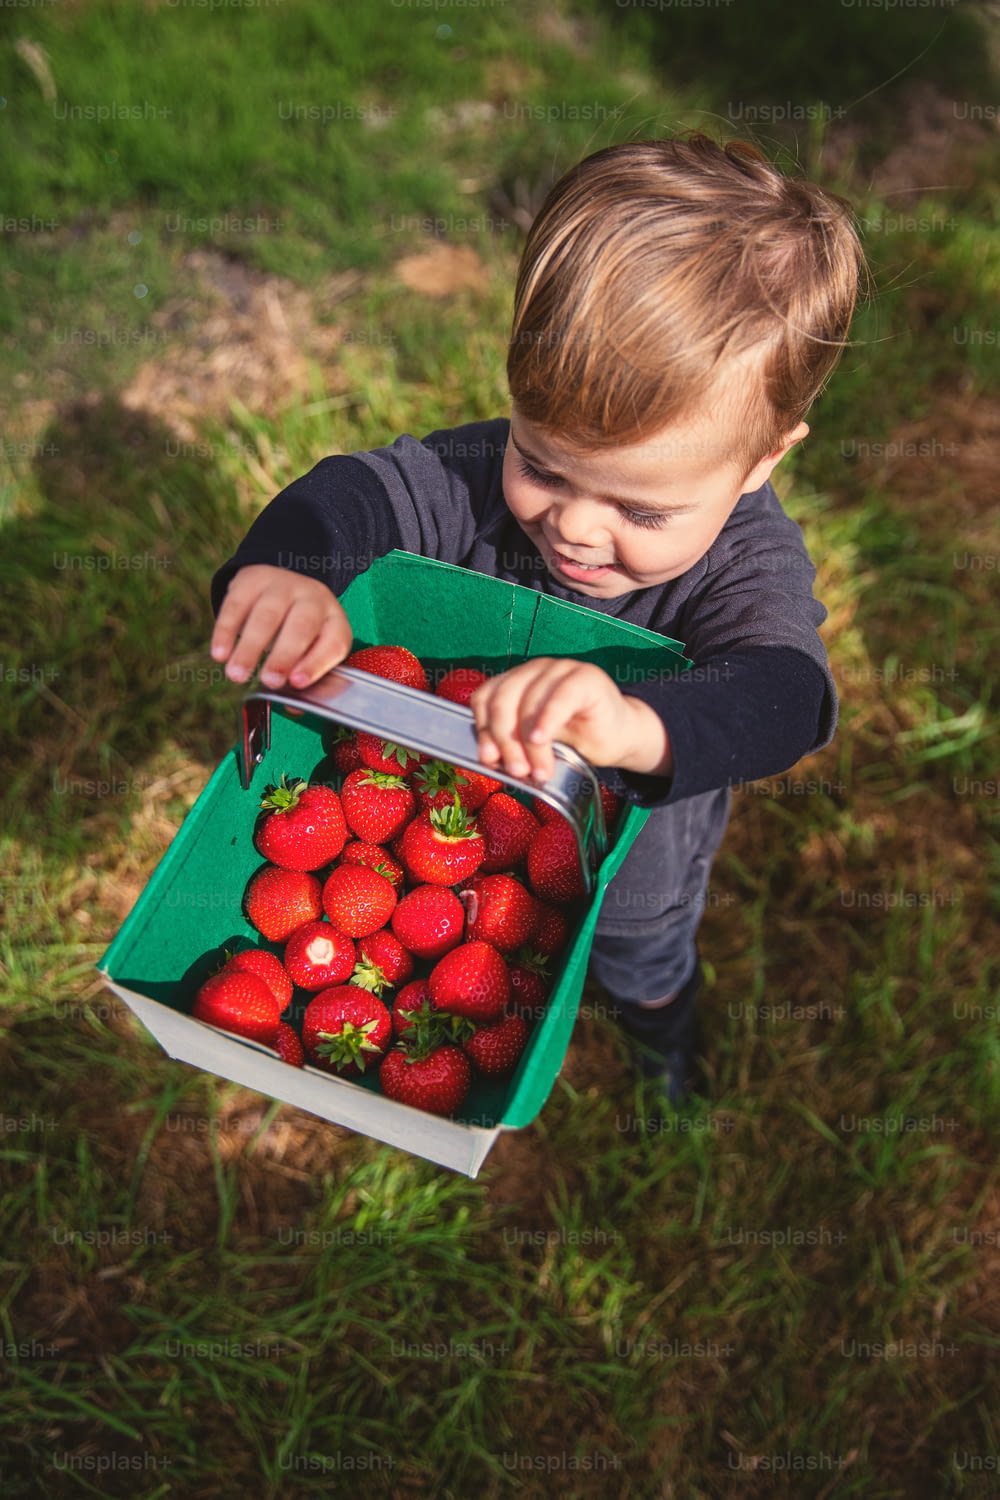 a young boy holding a box of strawberries